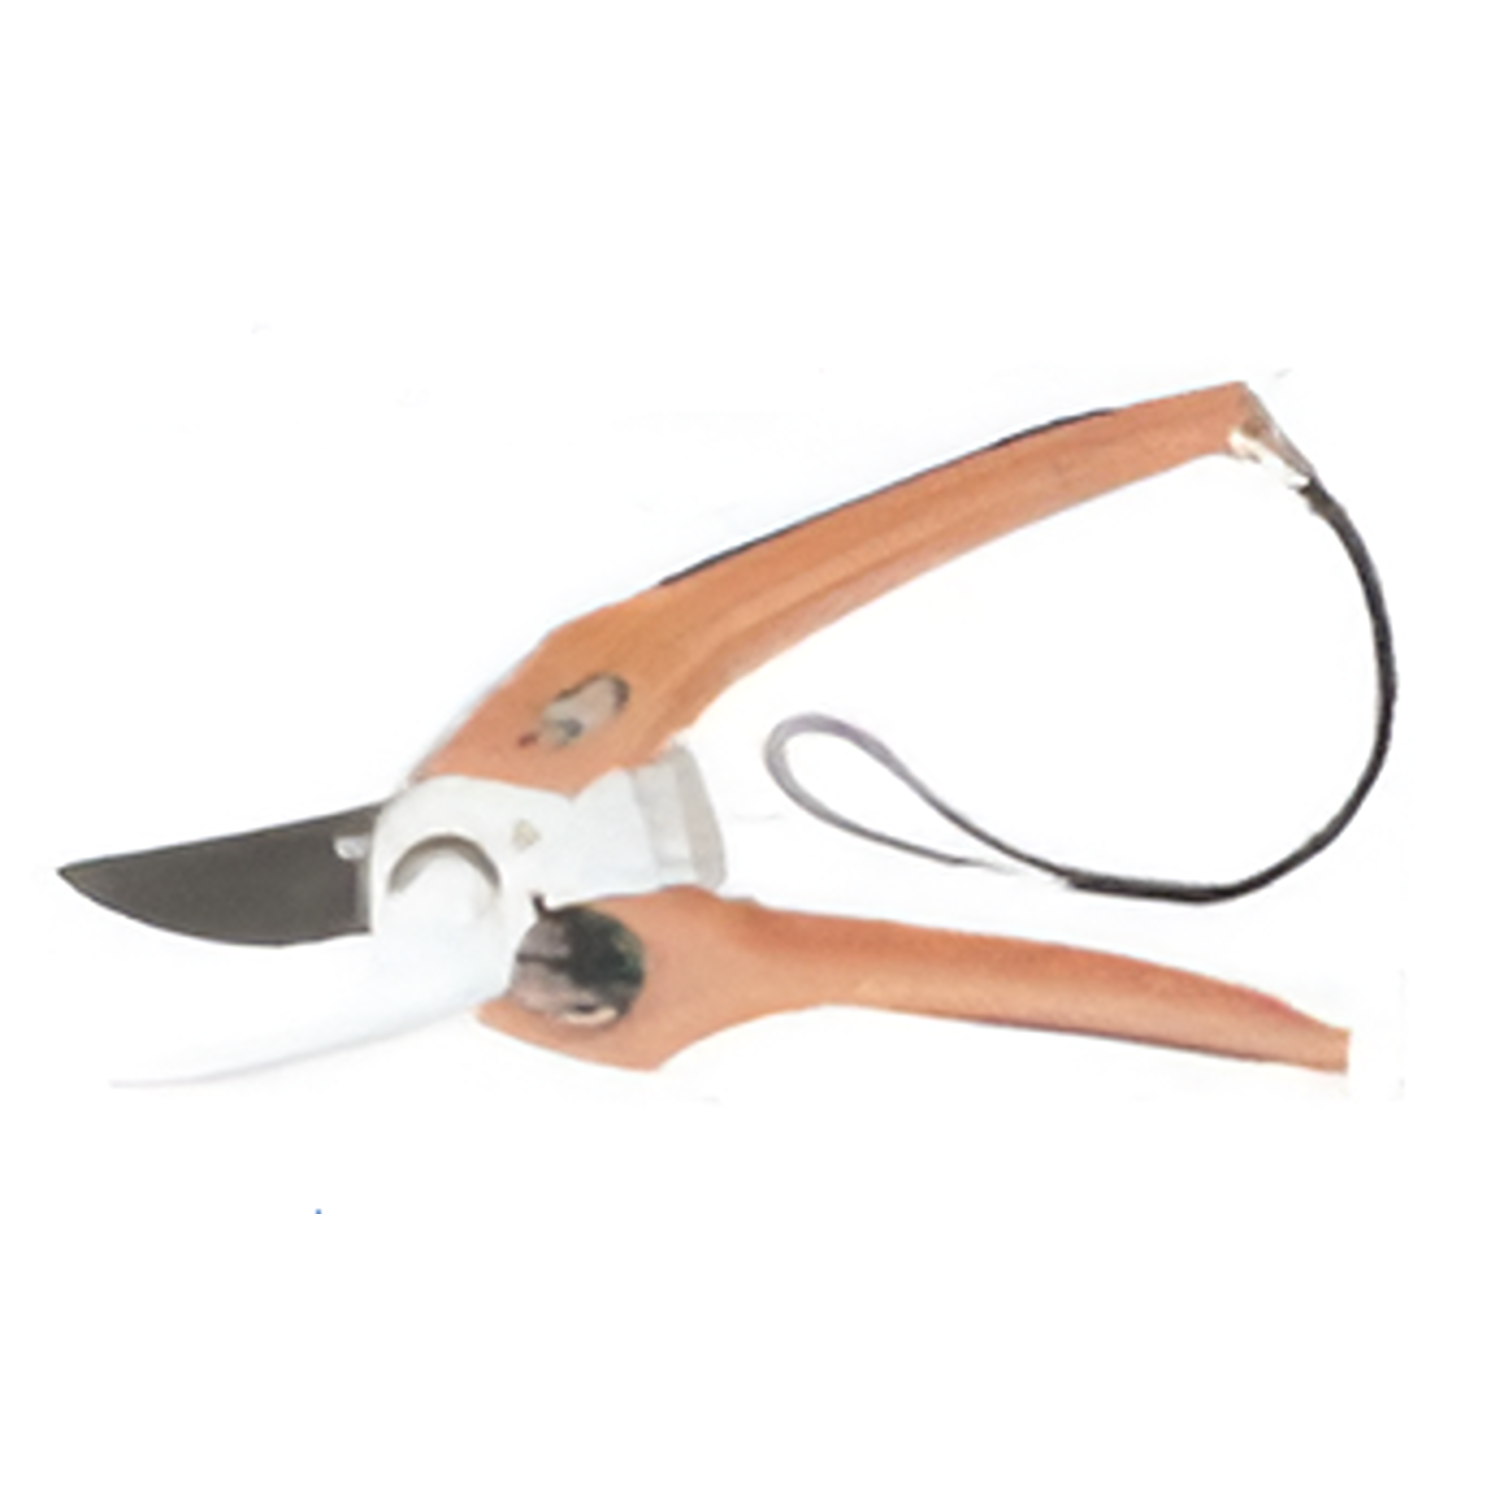 YEW AIK Pruning Shear- 1260 8” Extra Heavy Duty Non-Slip Handle - Premium Pruning Shear from YEW AIK - Shop now at Yew Aik.